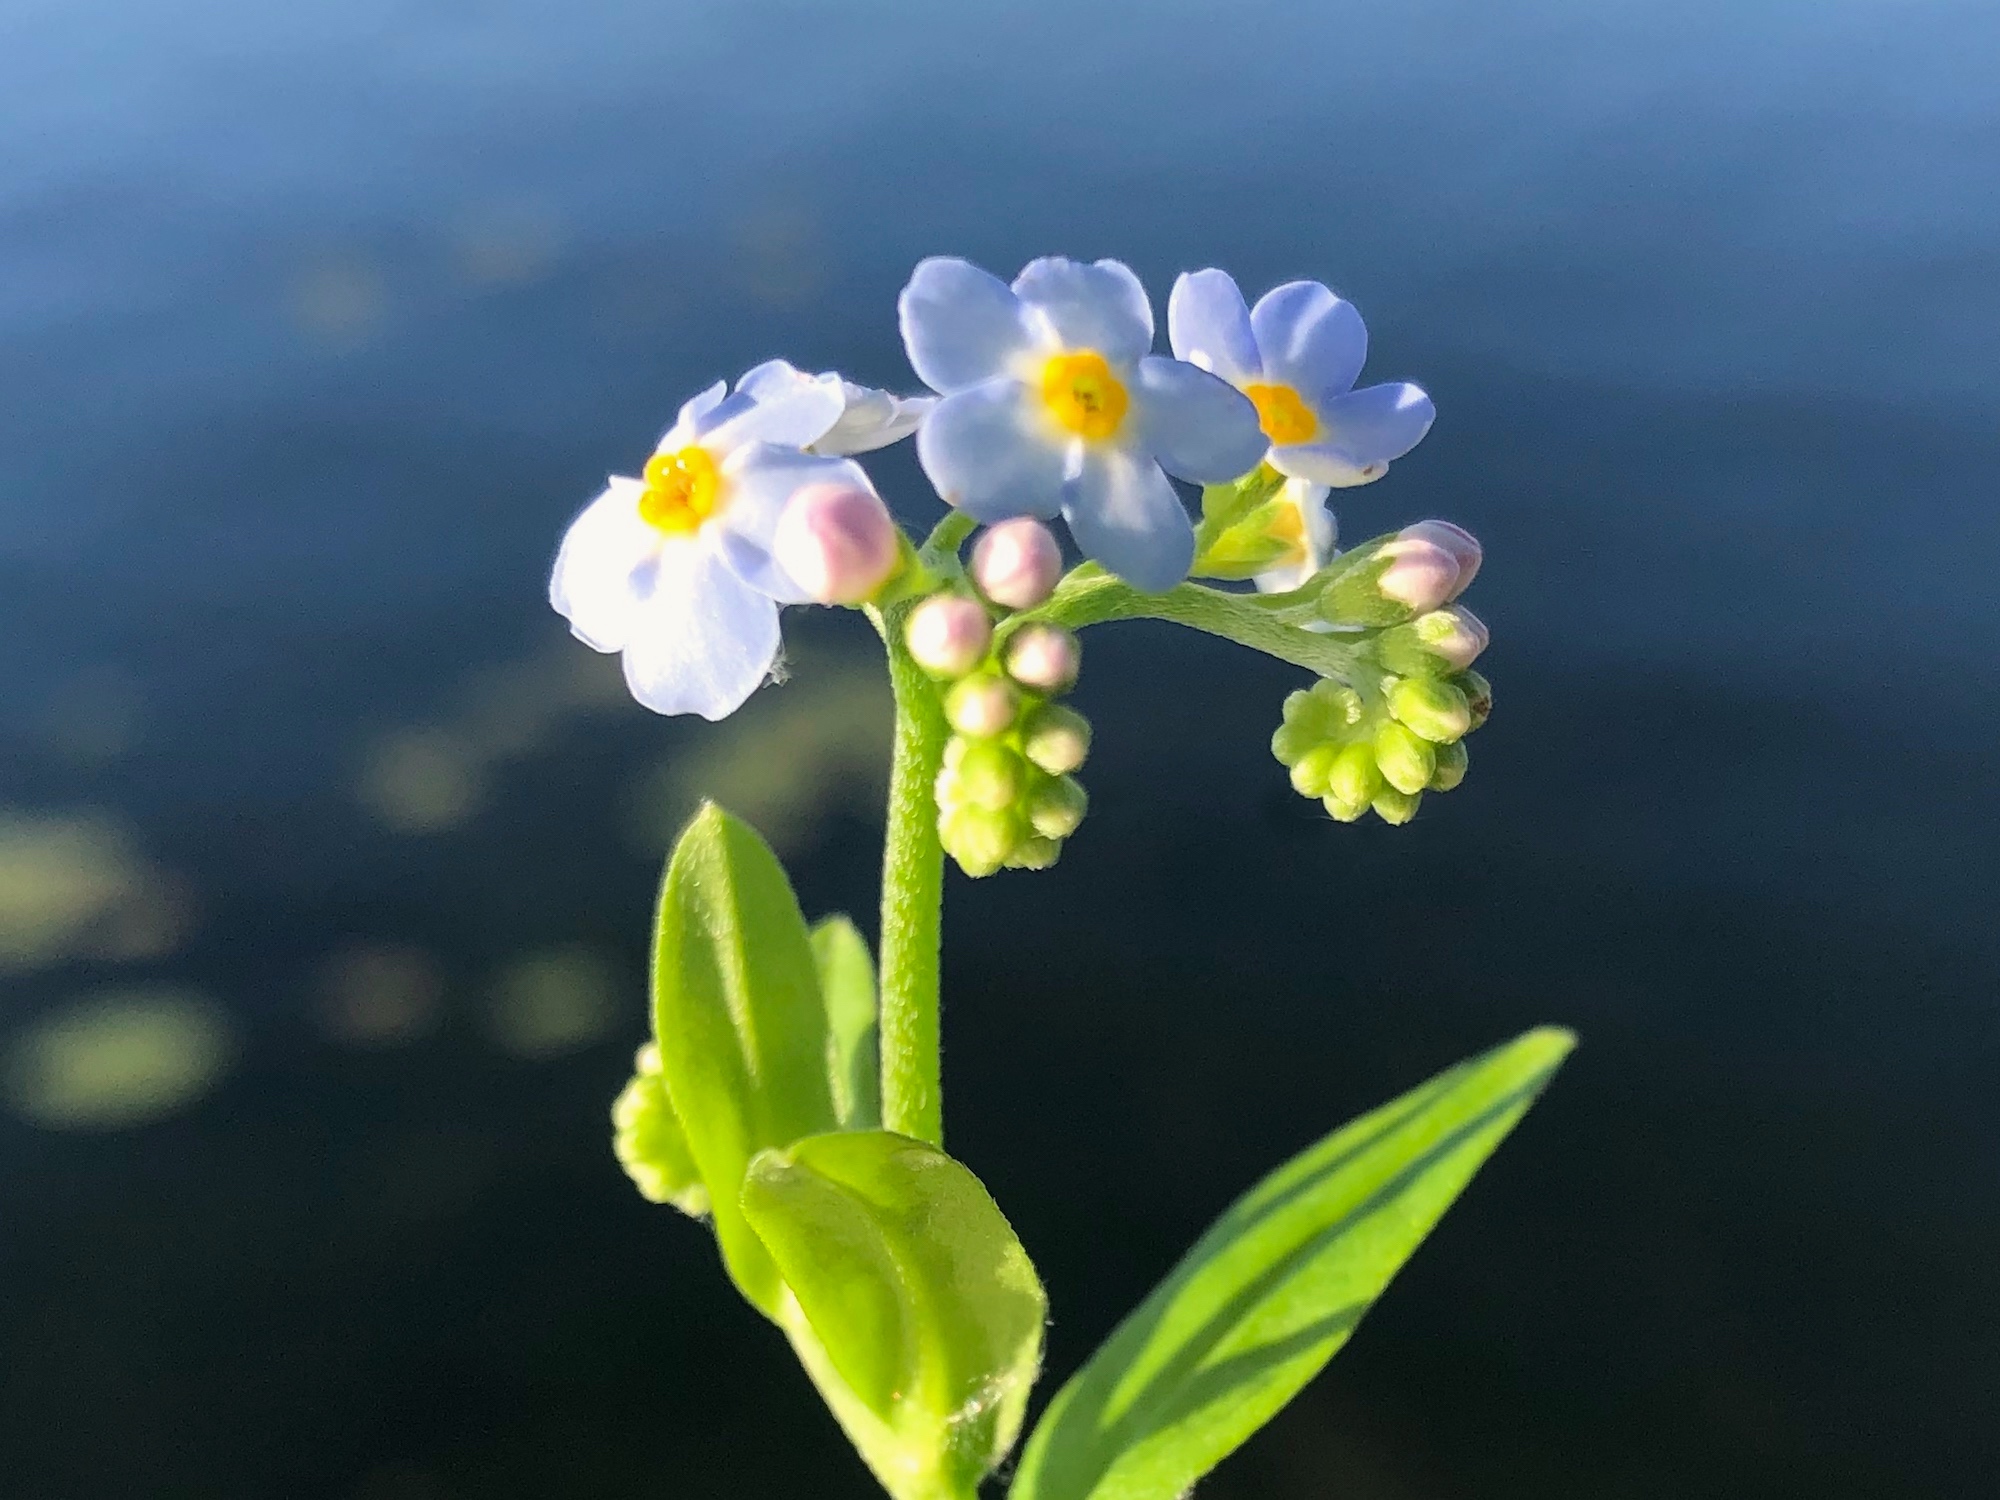 True Forget-me-not near cattails at Pickford Street stormwater outflow into Lake Wingra in Madison, Wisconsin on May 29, 2021.